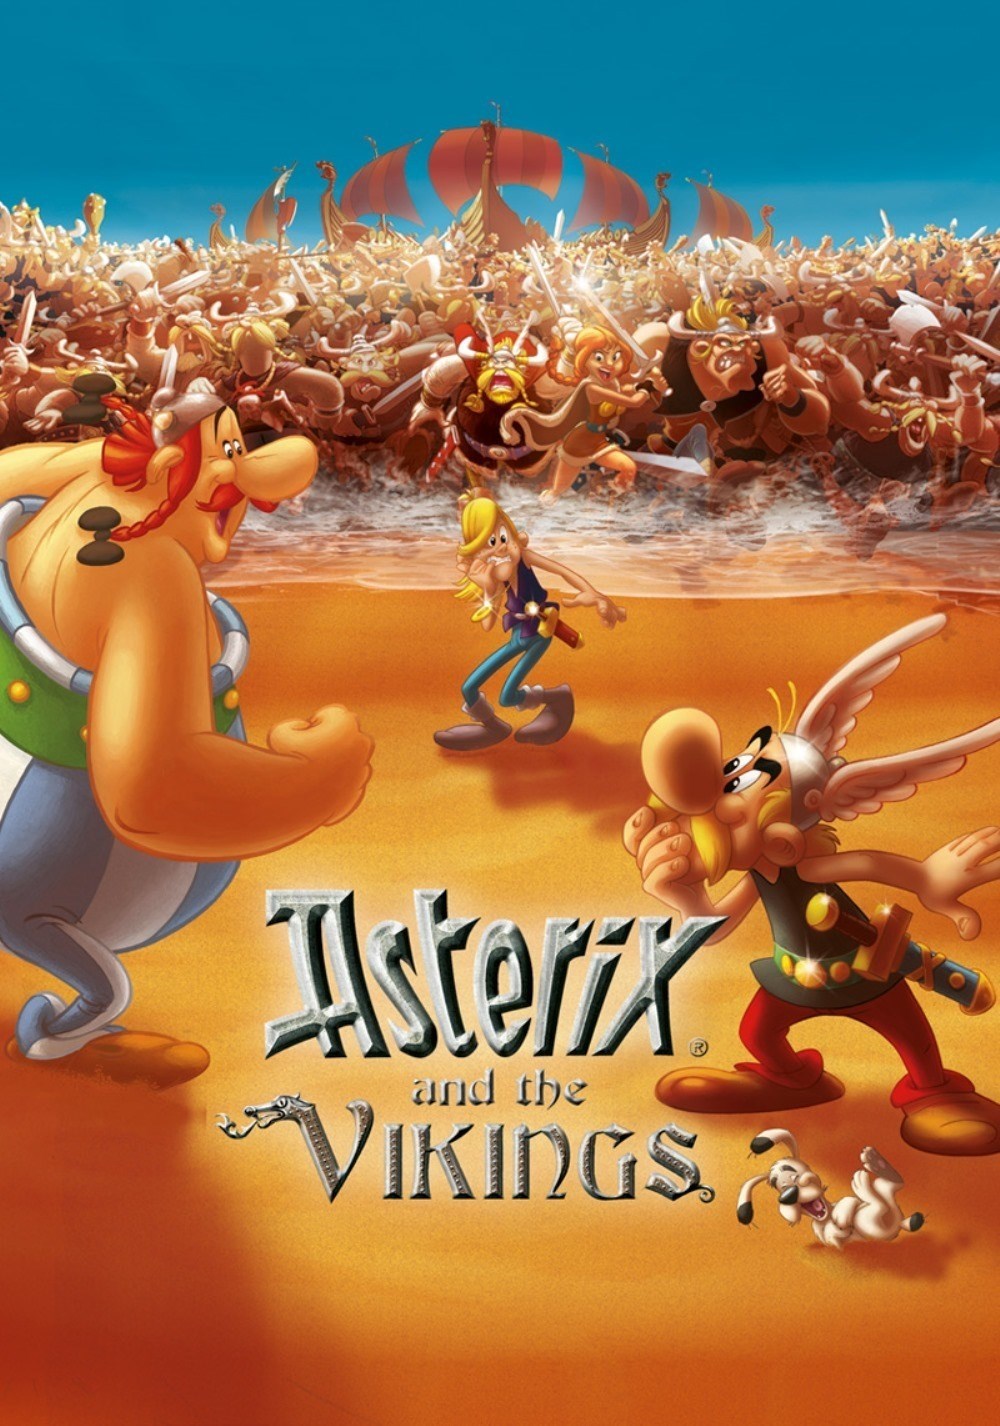 Asterix_and_the_Vikings